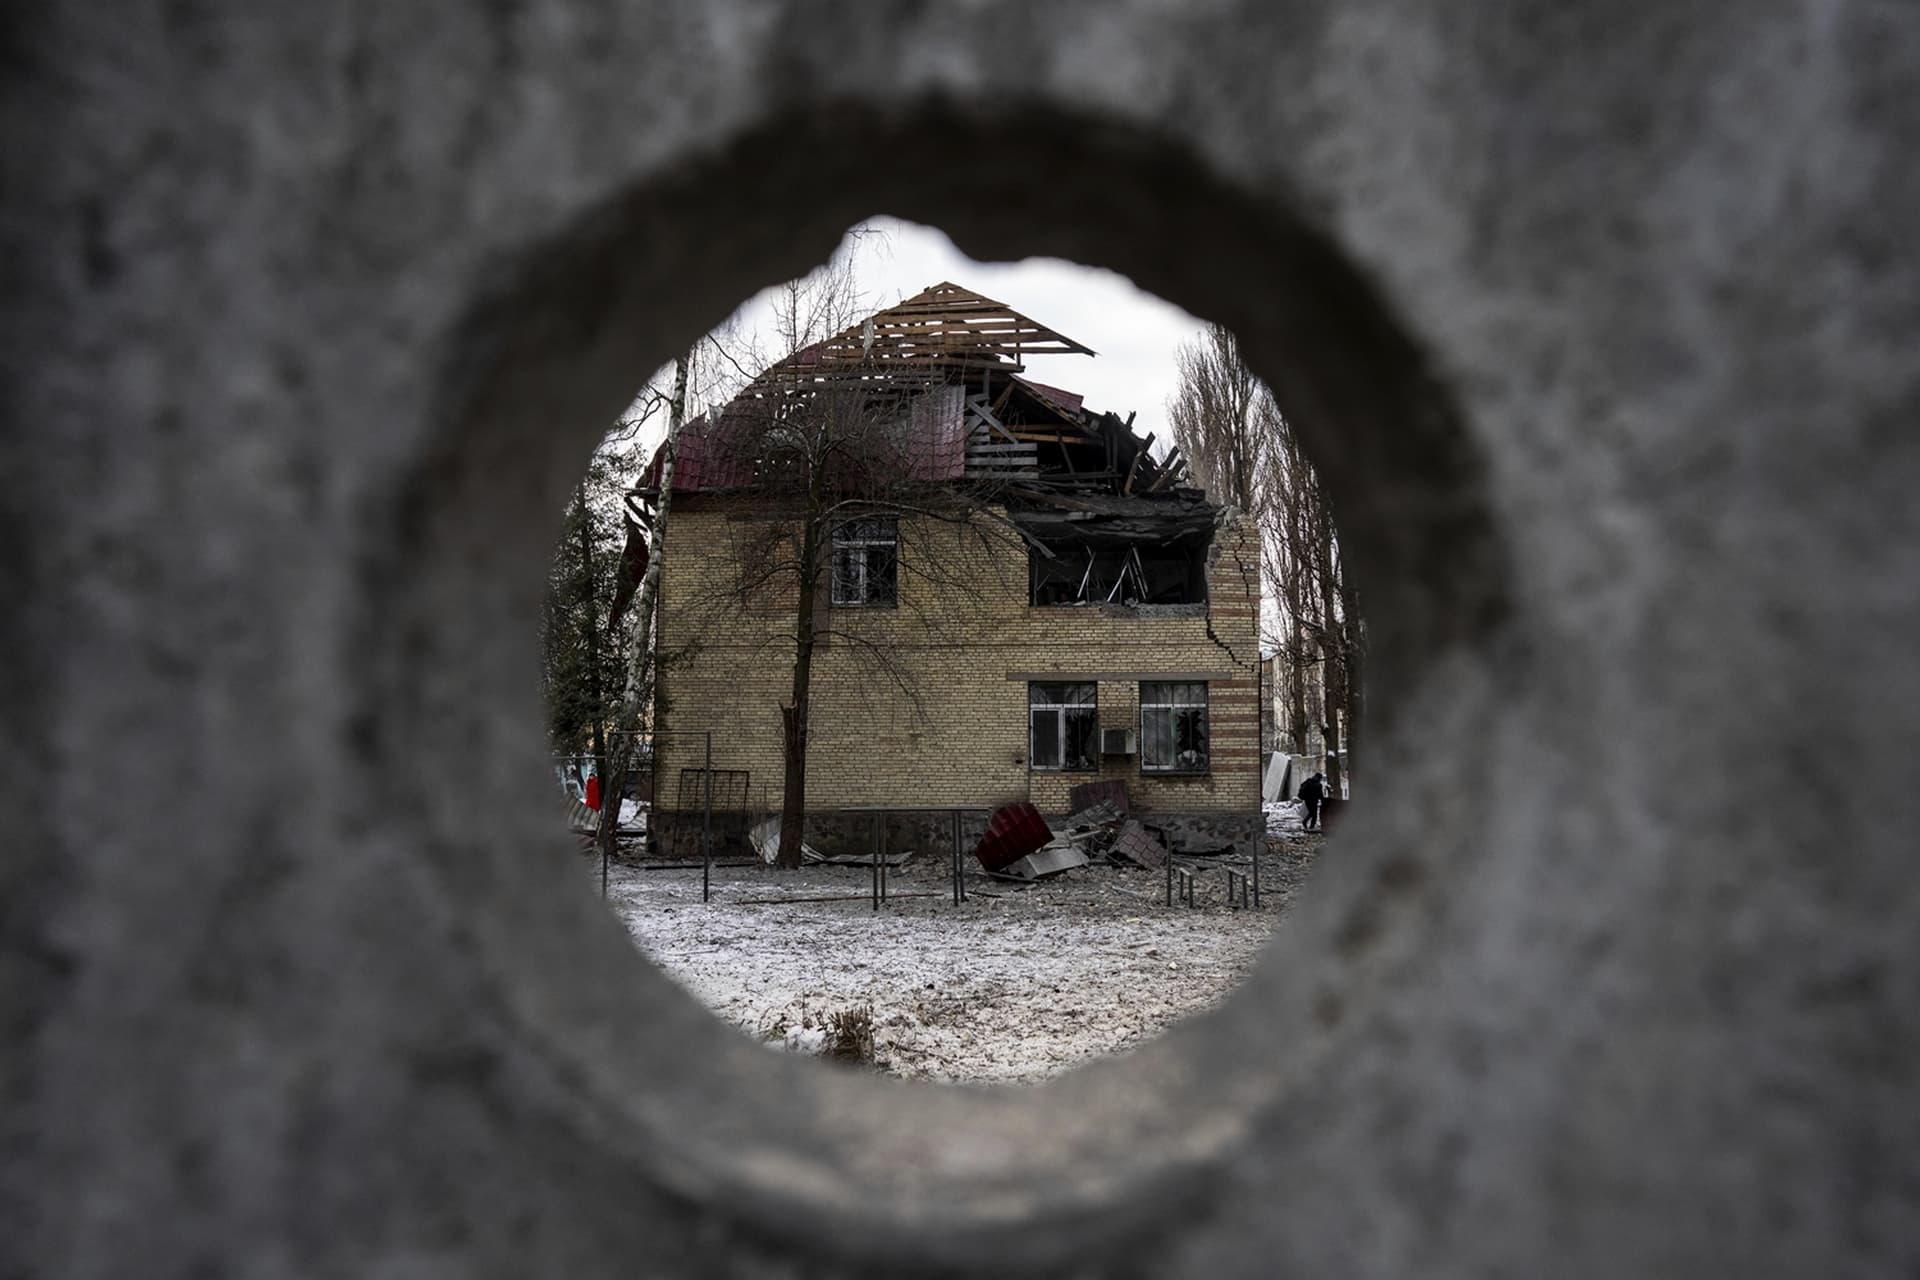 A tax office building that have been heavily damaged by Russian shelling, is seen through the fence, in Kyiv